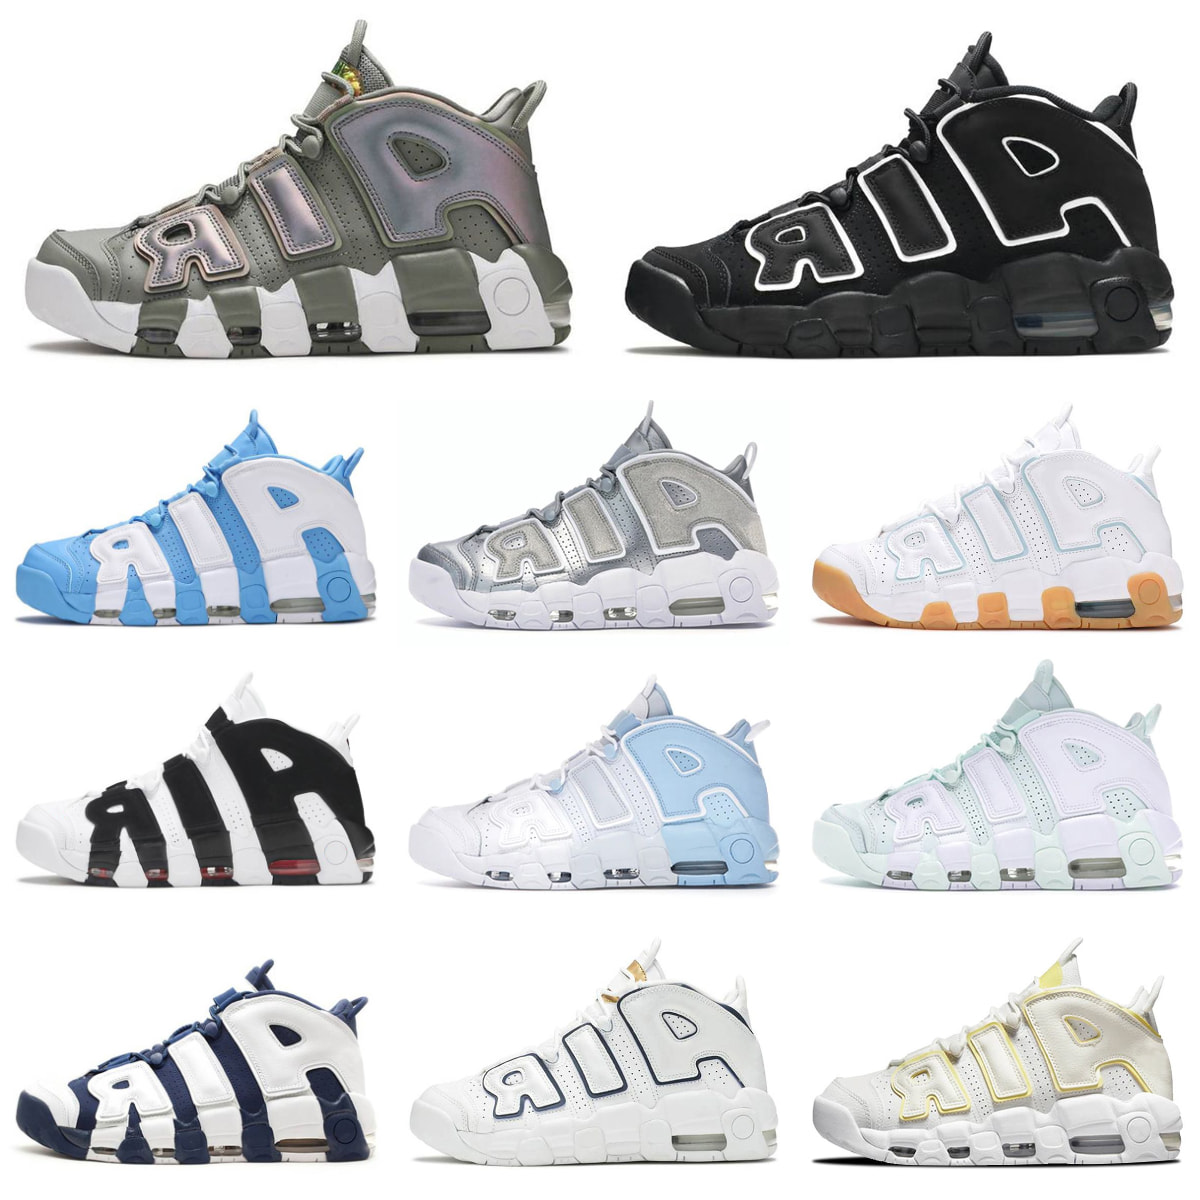 

Trainers More Uptempos 96 Mens Basketball Shoes Black Royal Action Grape Light Aqua Valerian Battle Blue Volt White 96s Tatal Orange Hoops Barley AiR Green Sneakers, Please contact us